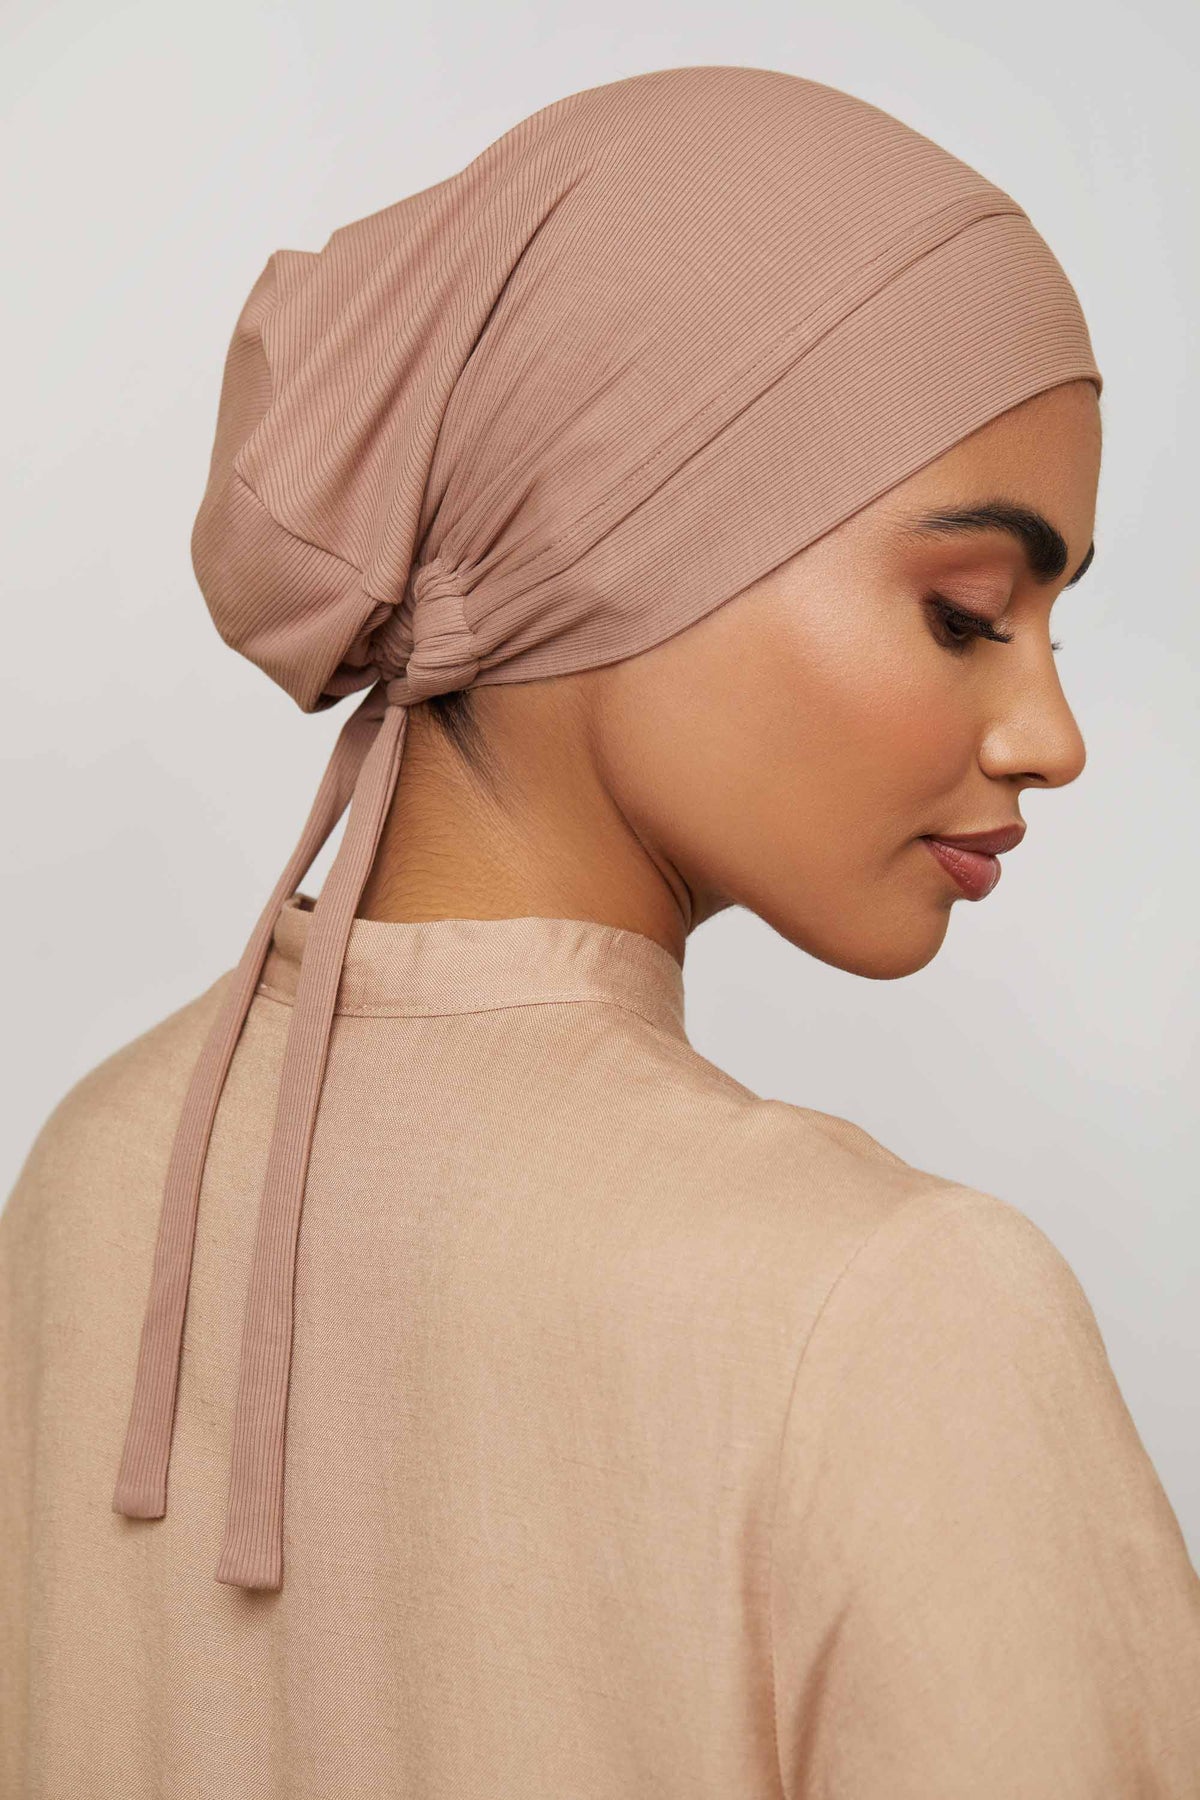 Ribbed Tie Back Undercap - Ginger Snap Extra Small Accessories Veiled 